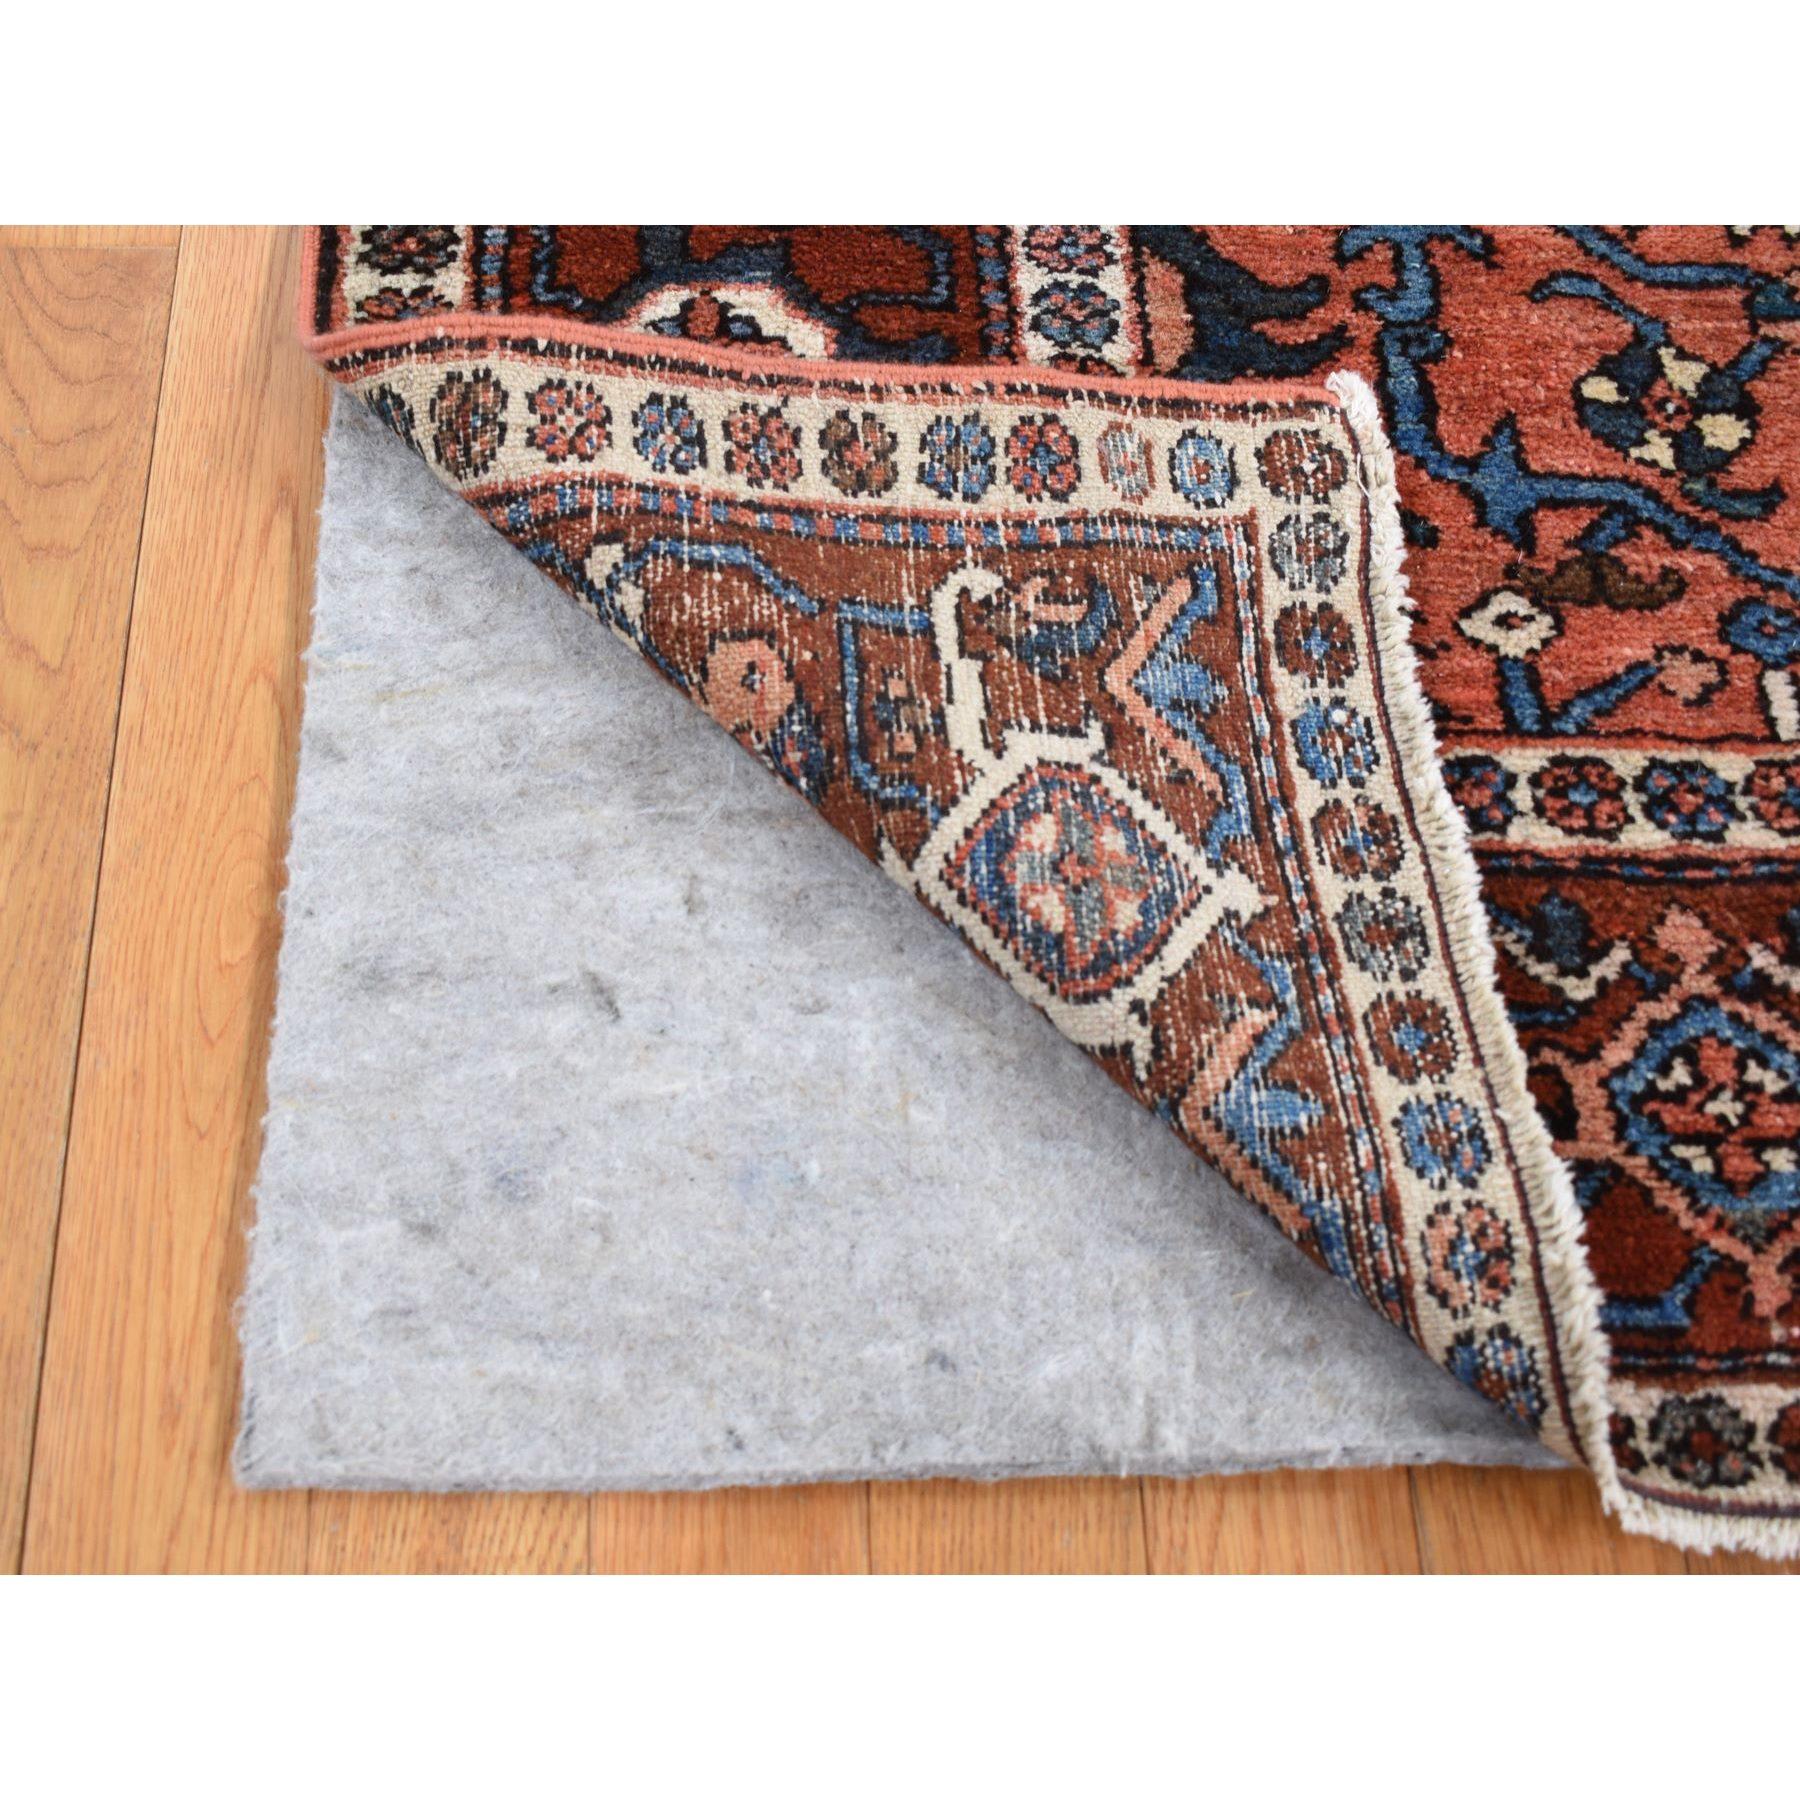 This fabulous Hand-Knotted carpet has been created and designed for extra strength and durability. This rug has been handcrafted for weeks in the traditional method that is used to make
Exact Rug Size in Feet and Inches : 4'9